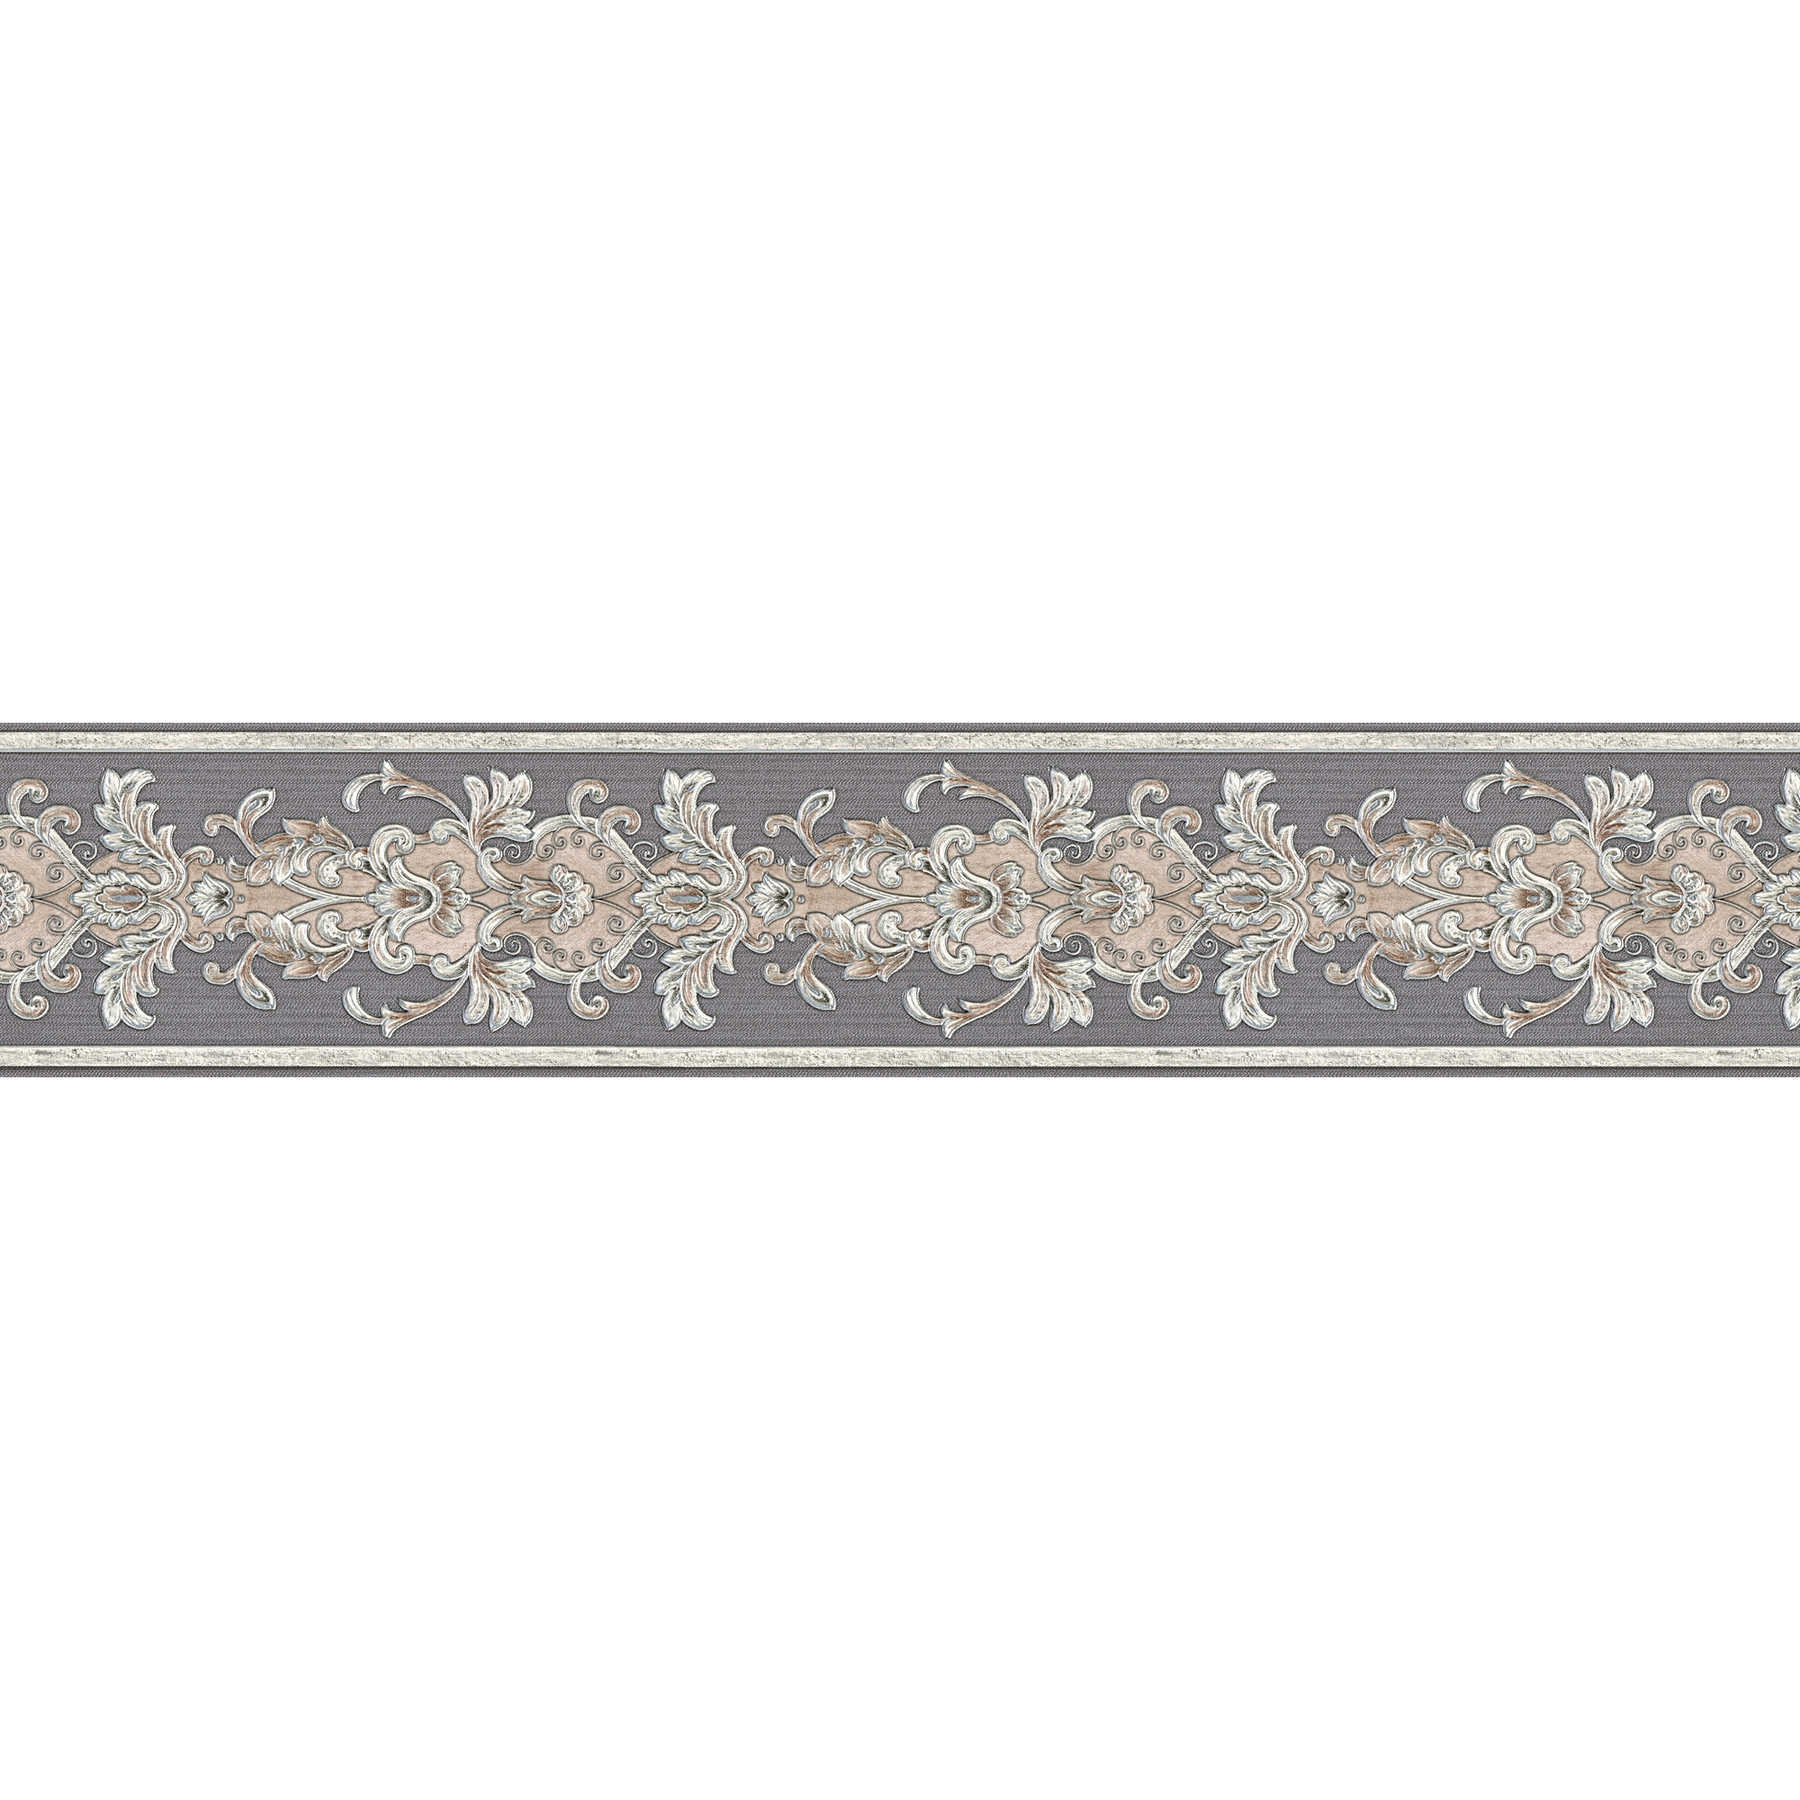         Metallic wallpaper border with floral ornaments - silver
    